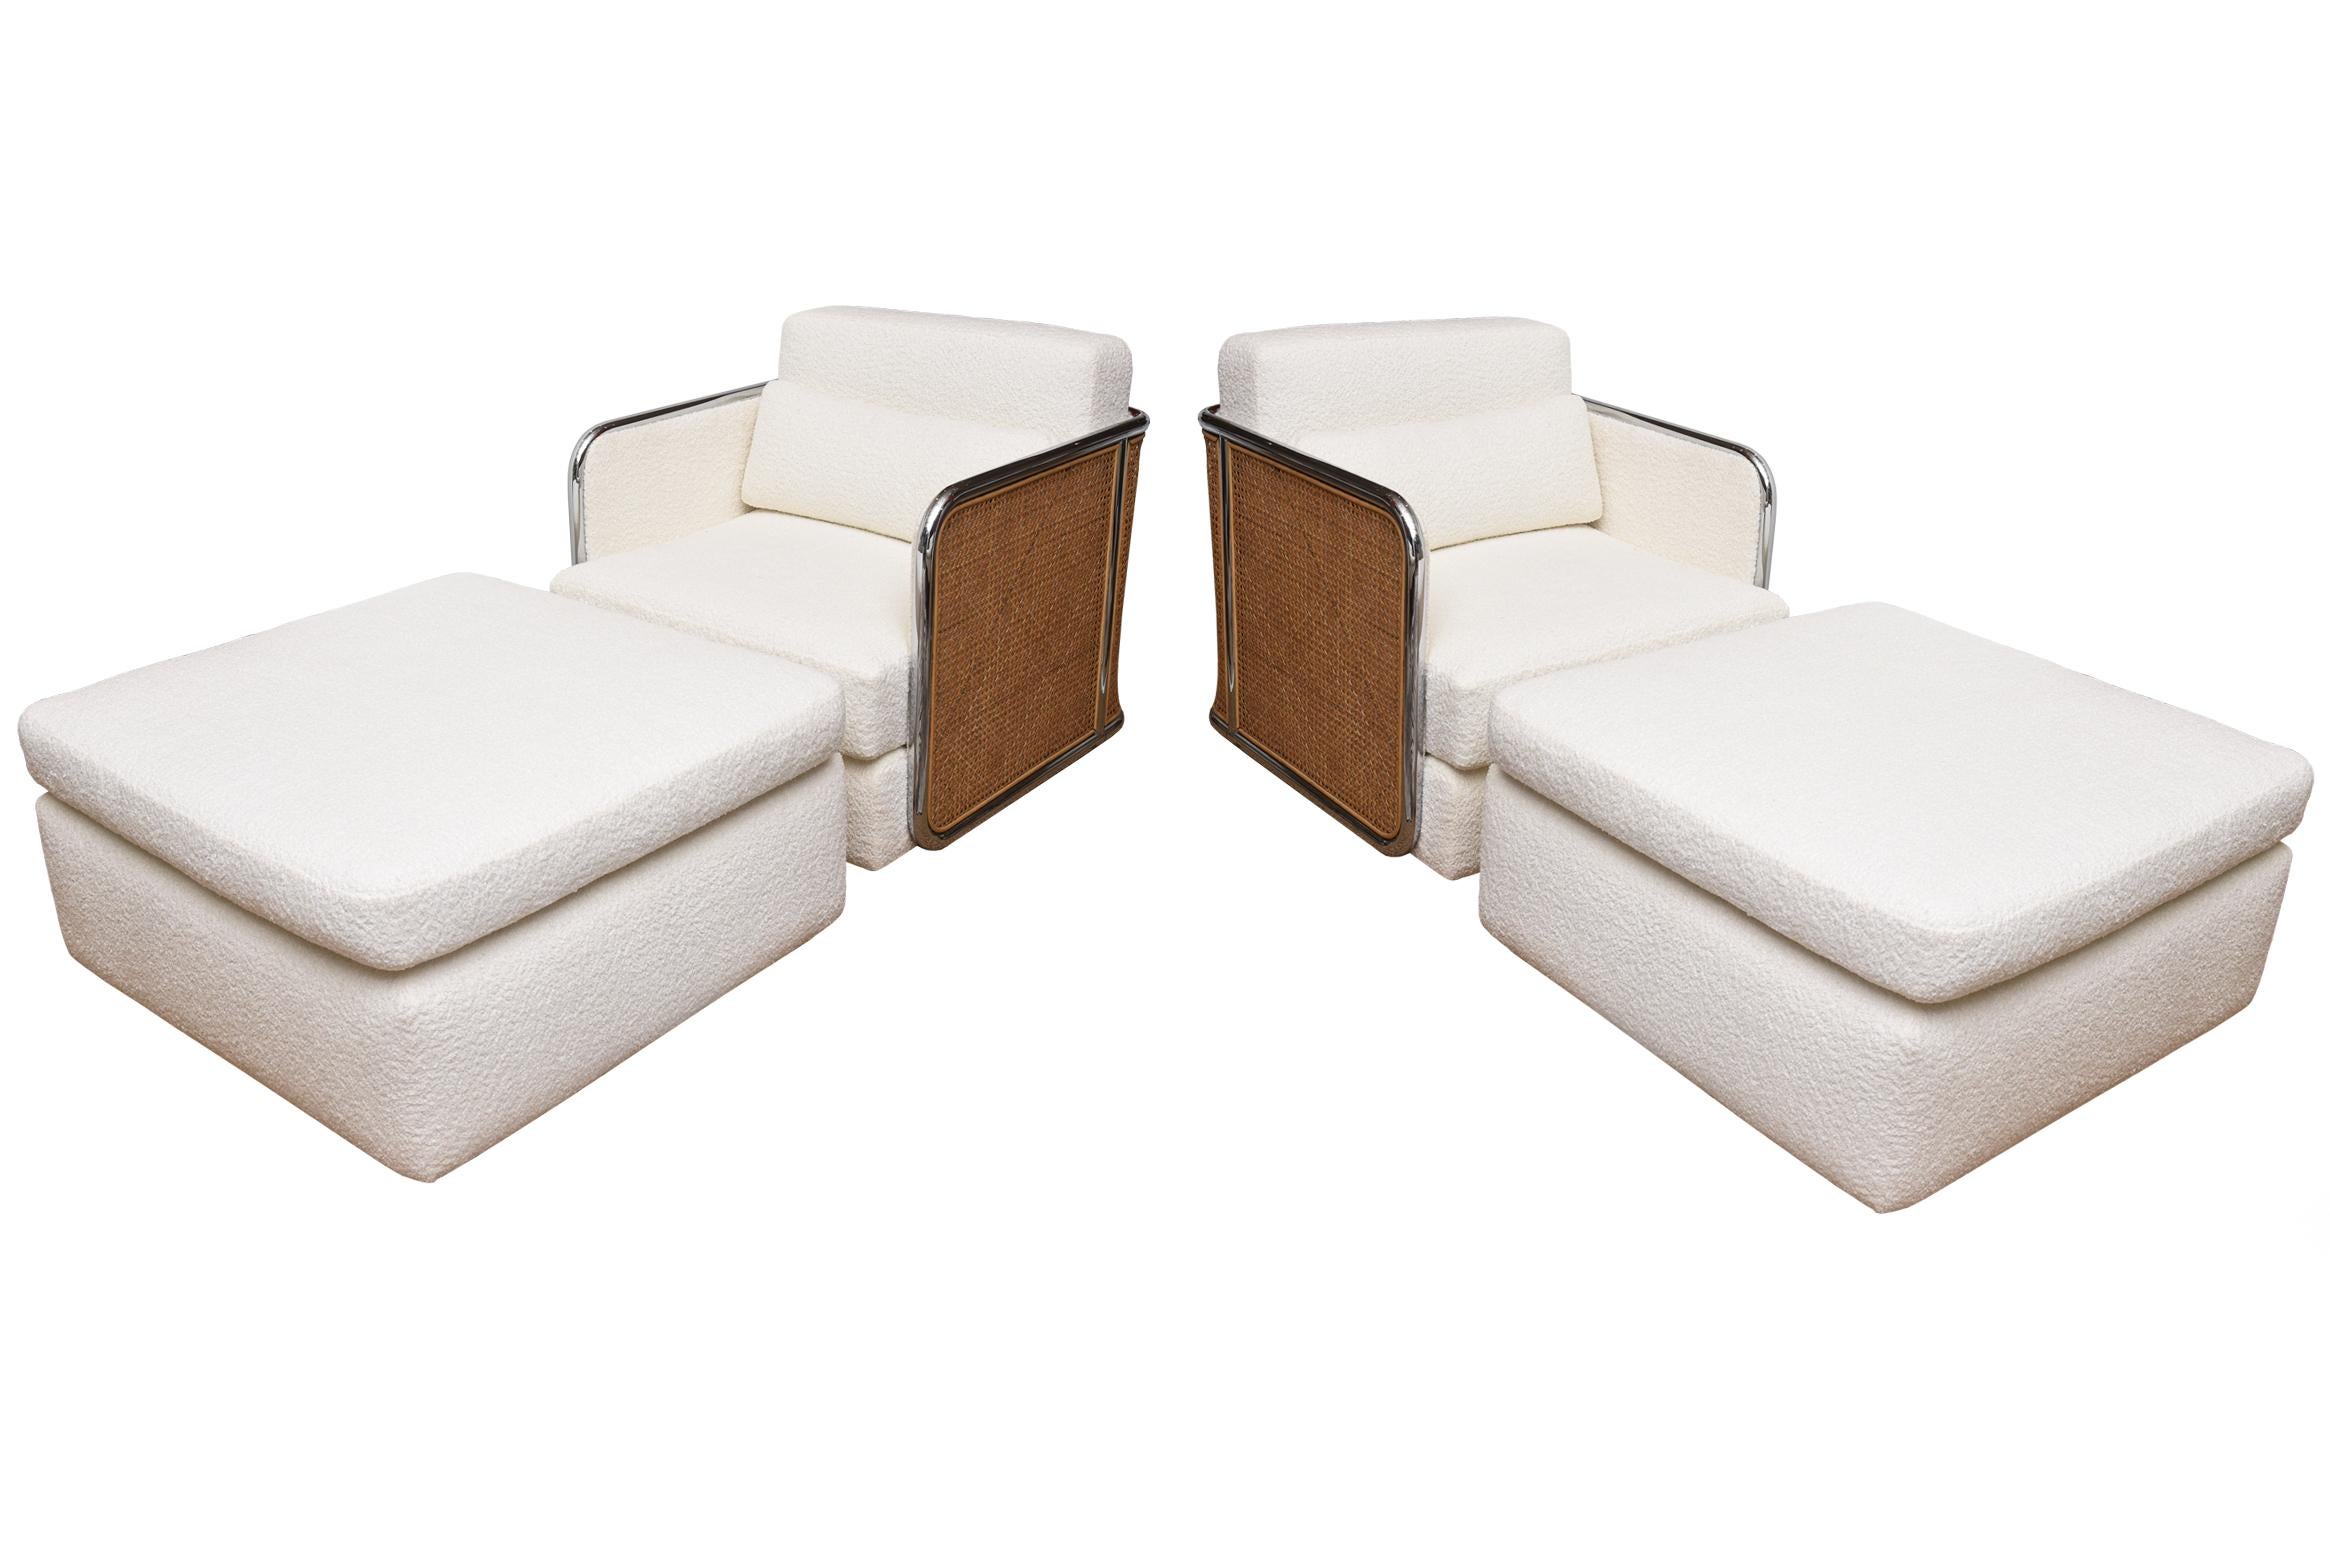 This very rare and modern fabulous set of Milo Baughman for Thayer Coggin vintage caned, chrome and upholstered lounge chairs with monumental original ottomans are from the early 70's. The catalog numbers for these are 1158 for the lounge chair and